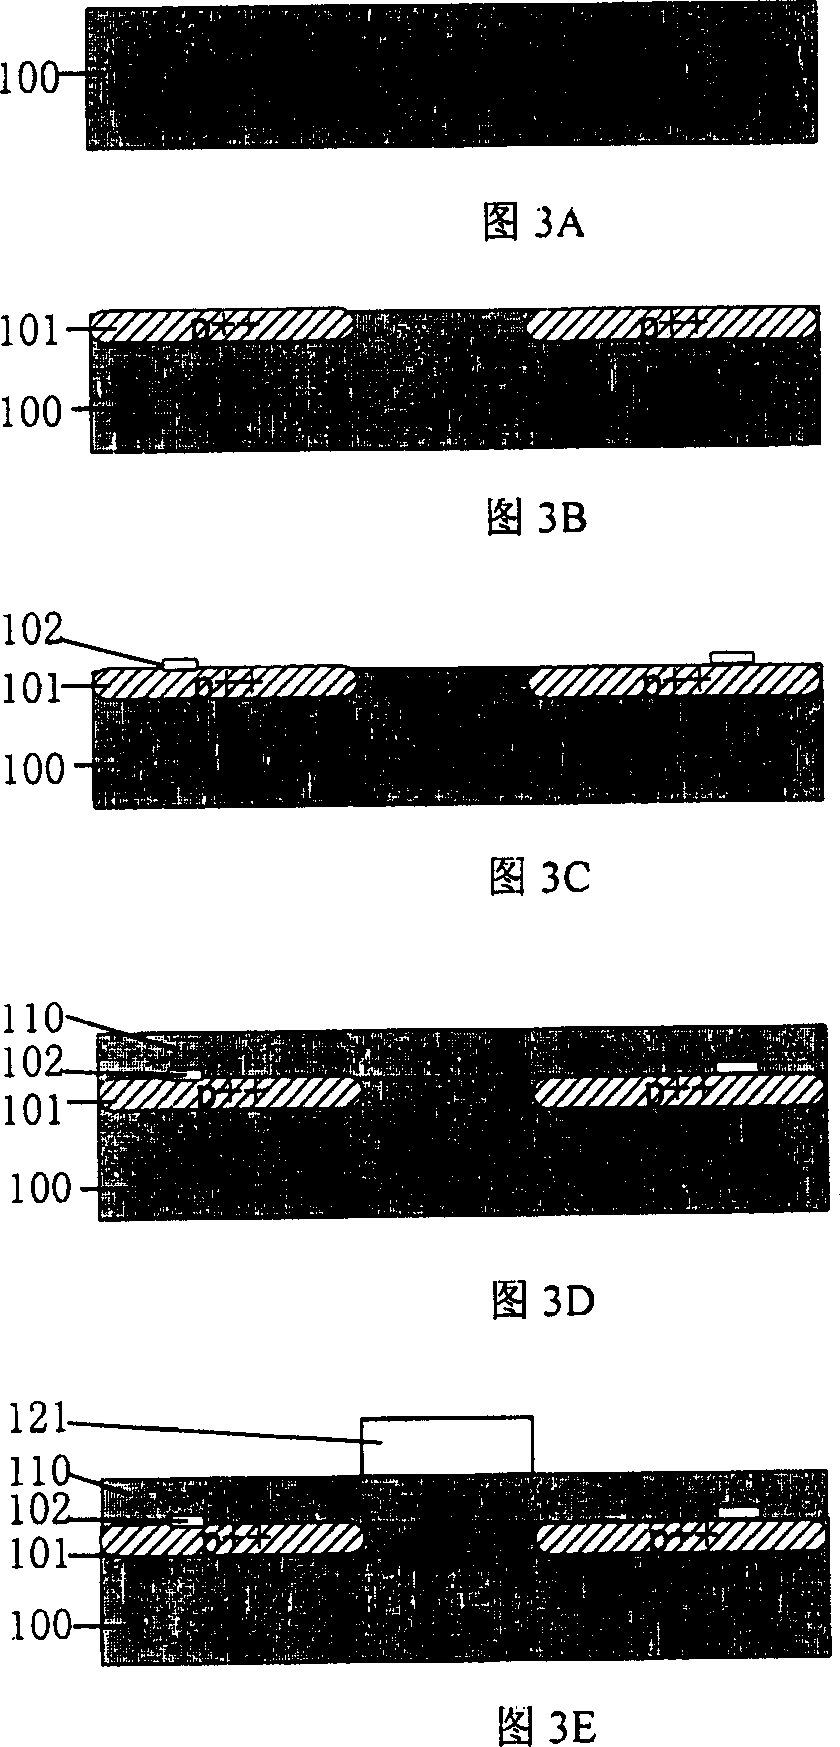 Method for making silicon-base micro-mechanical adjustable light wave-filter with wide frequency domain